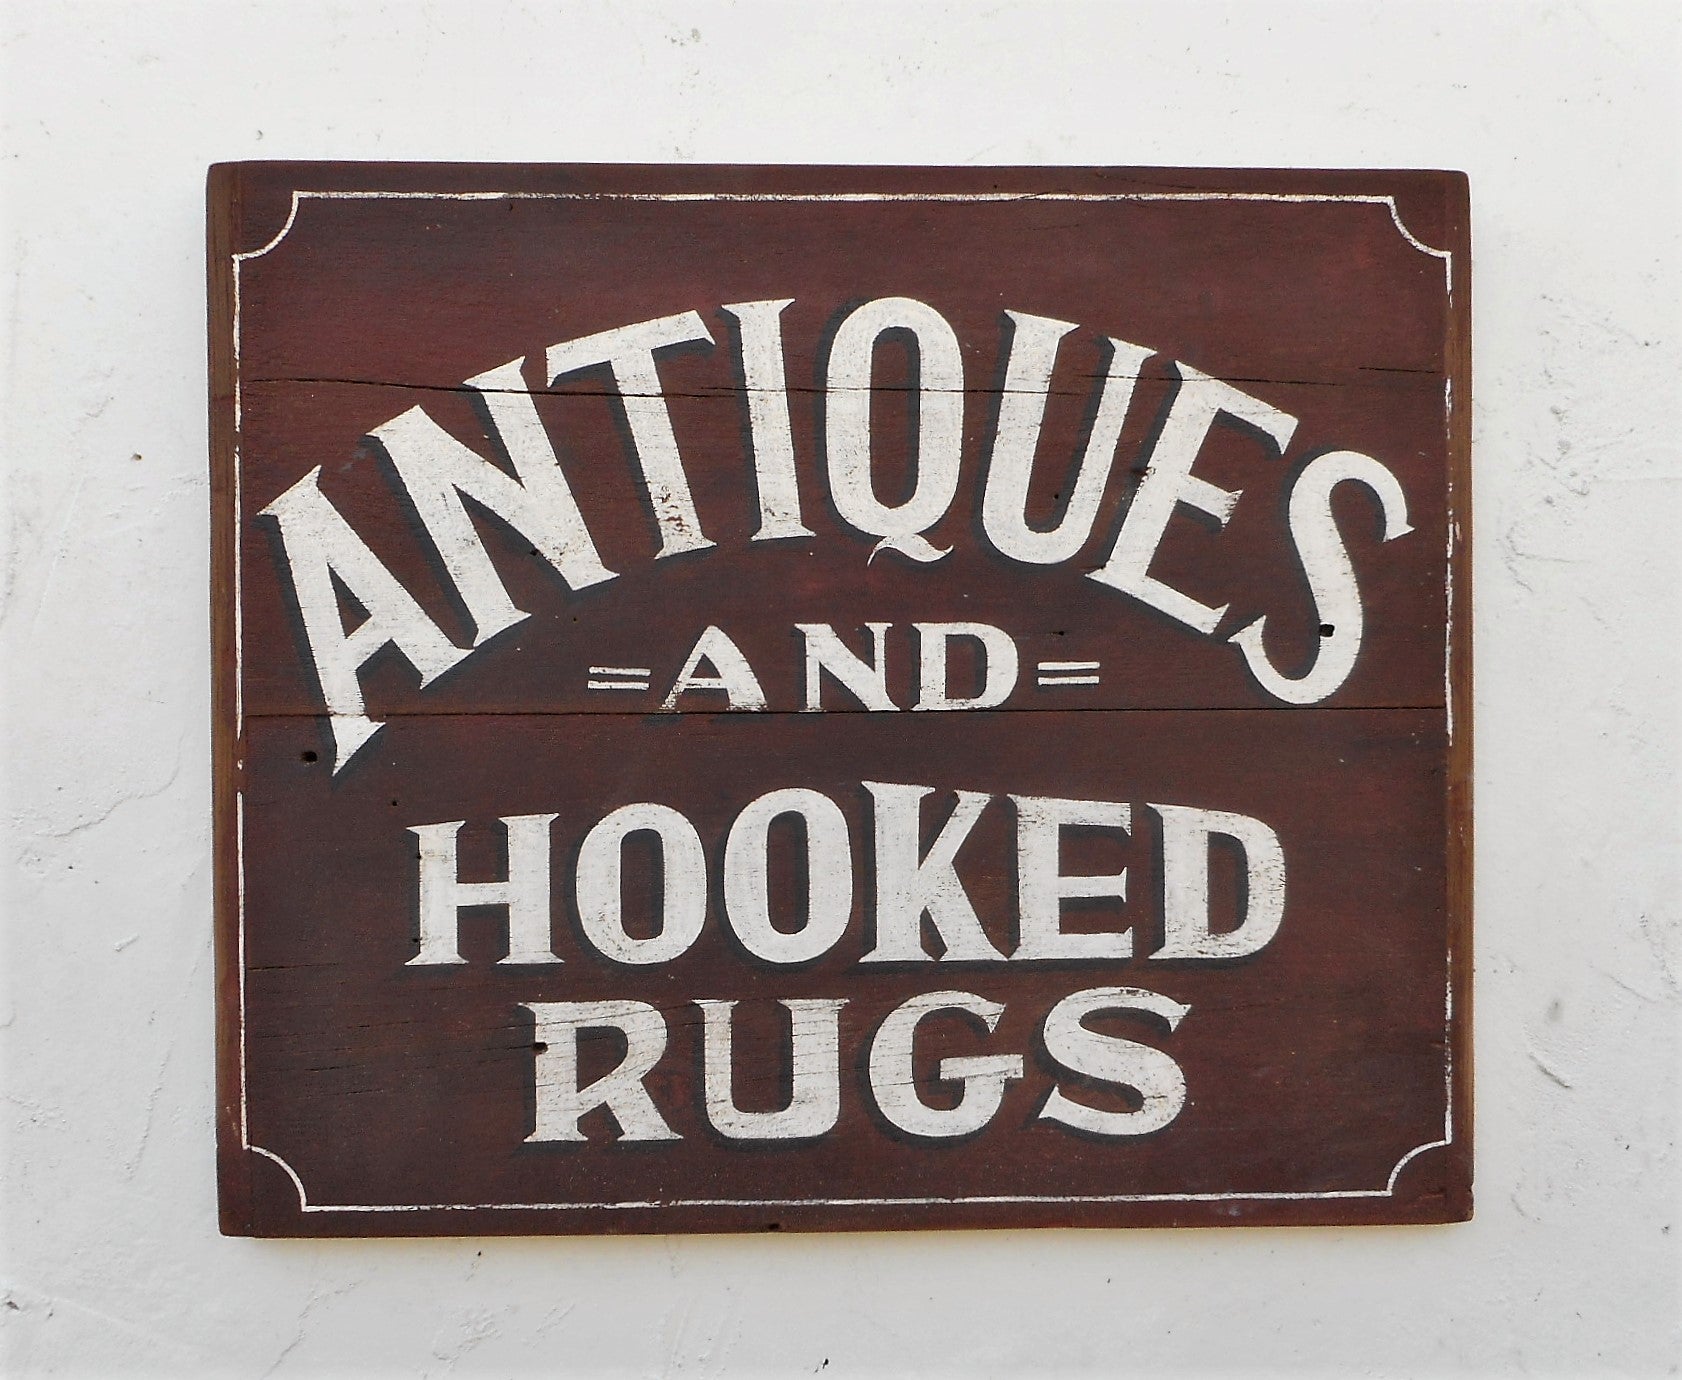 Antiques and Hooked Rugs